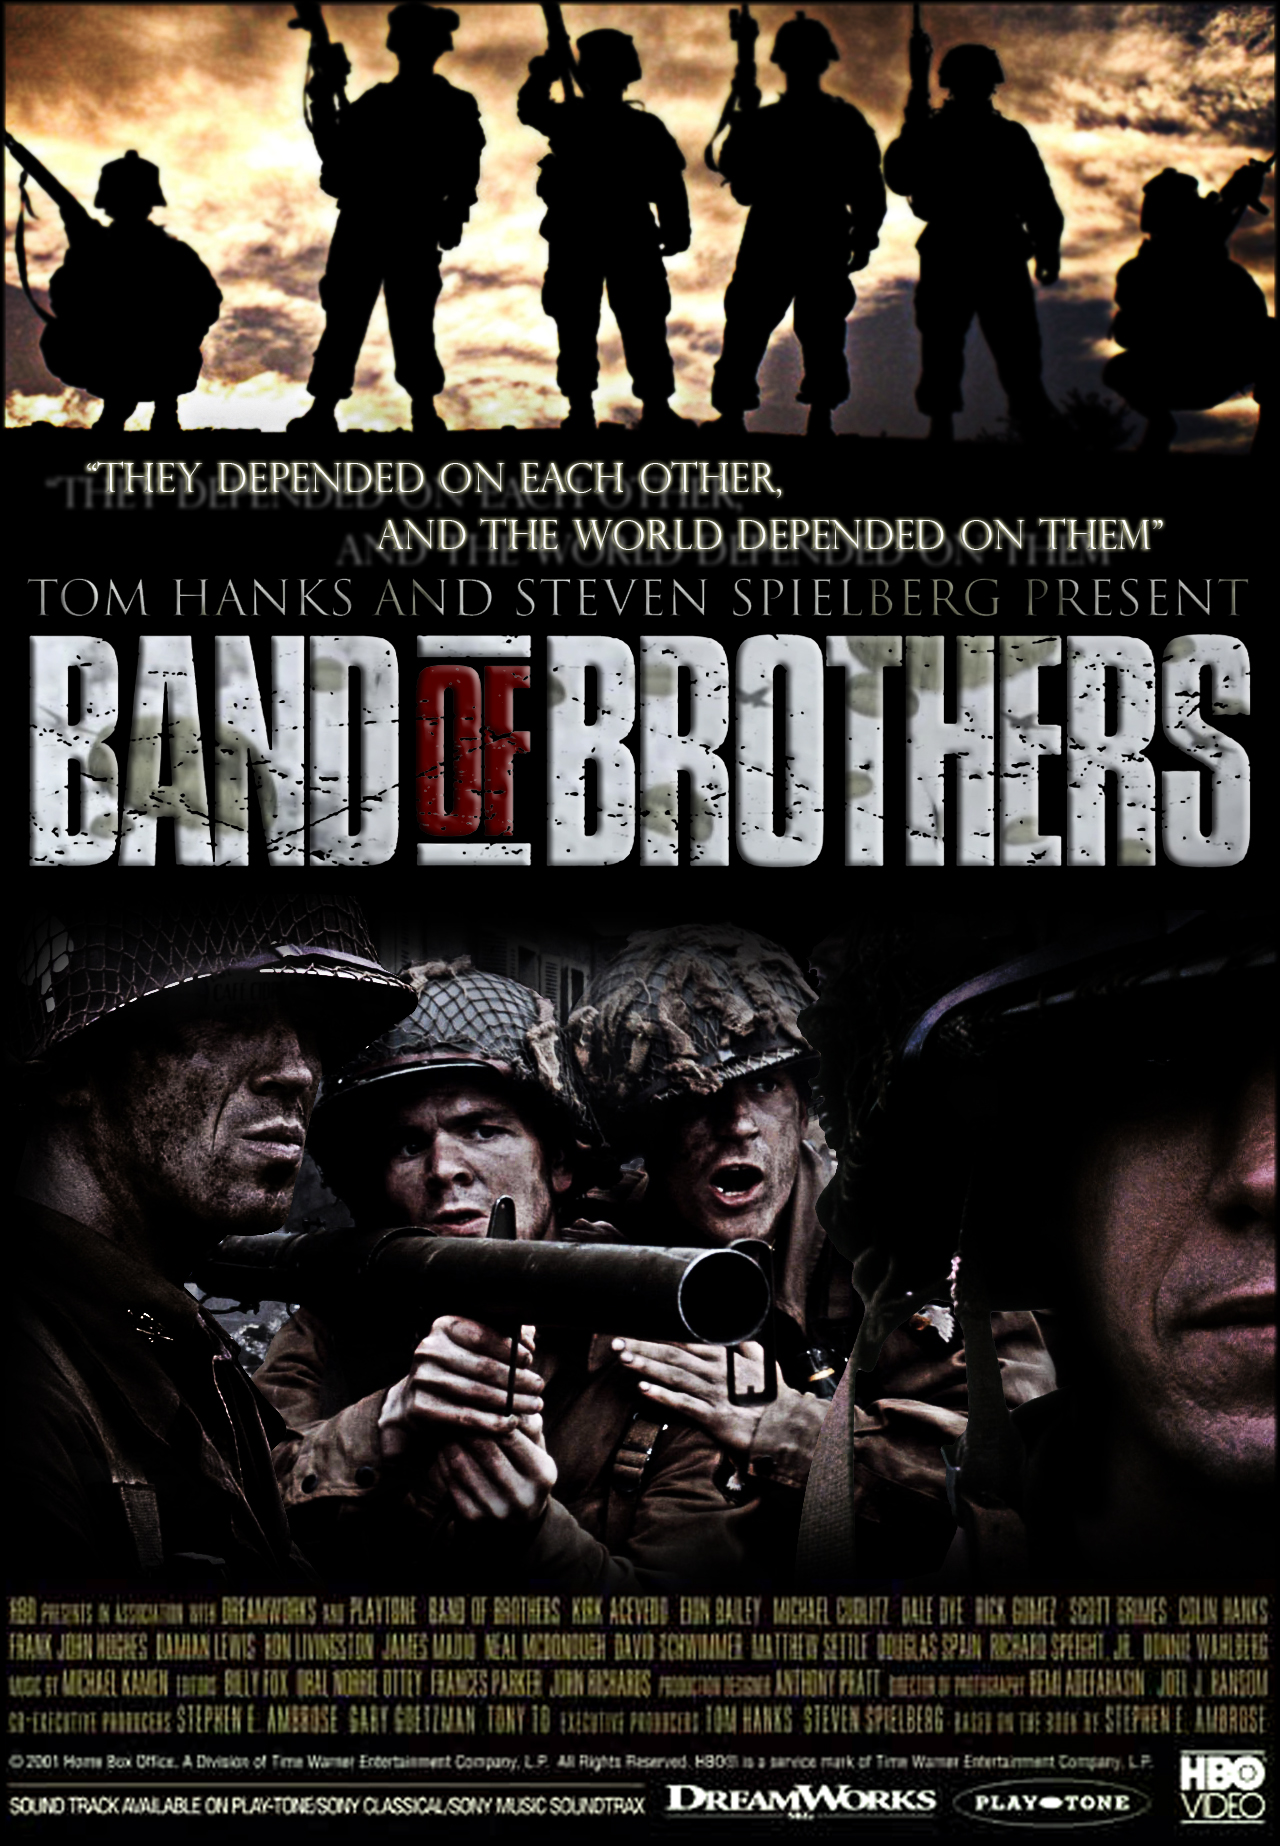 Band of Brothers Plakát terv